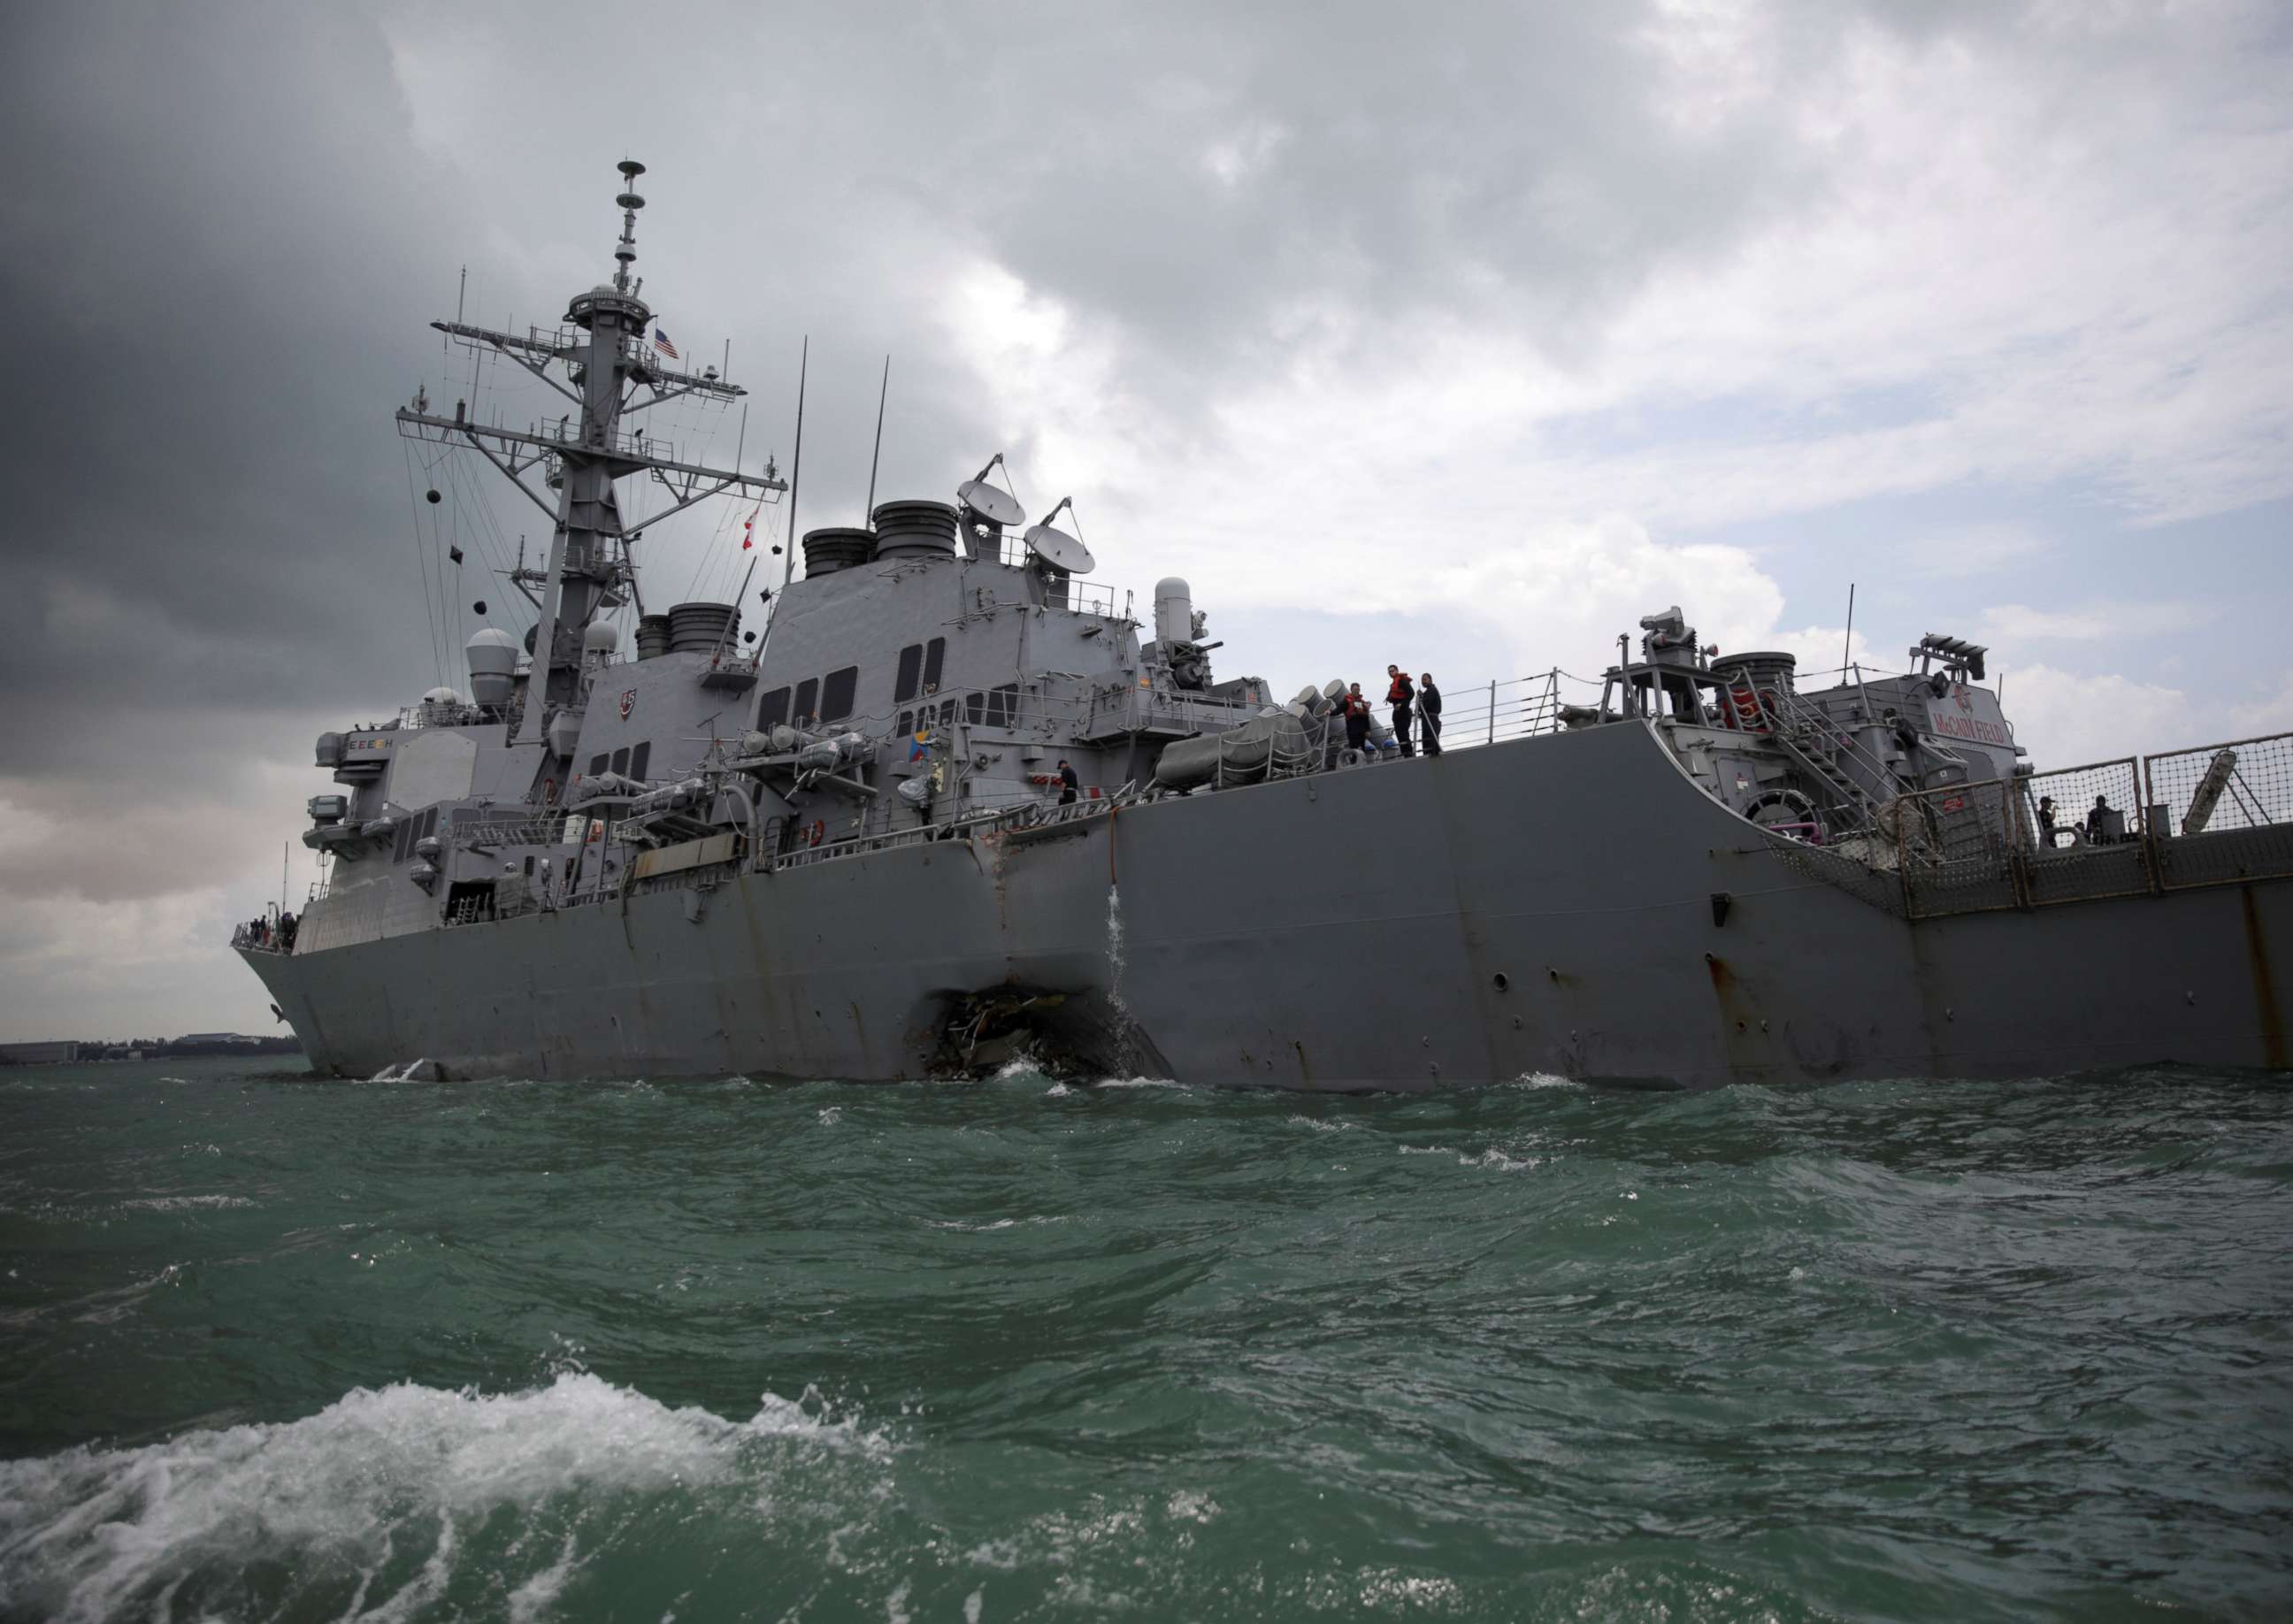 PHOTO: The USS John S. McCain is seen after a collision in Singapore, Aug. 21, 2017. 